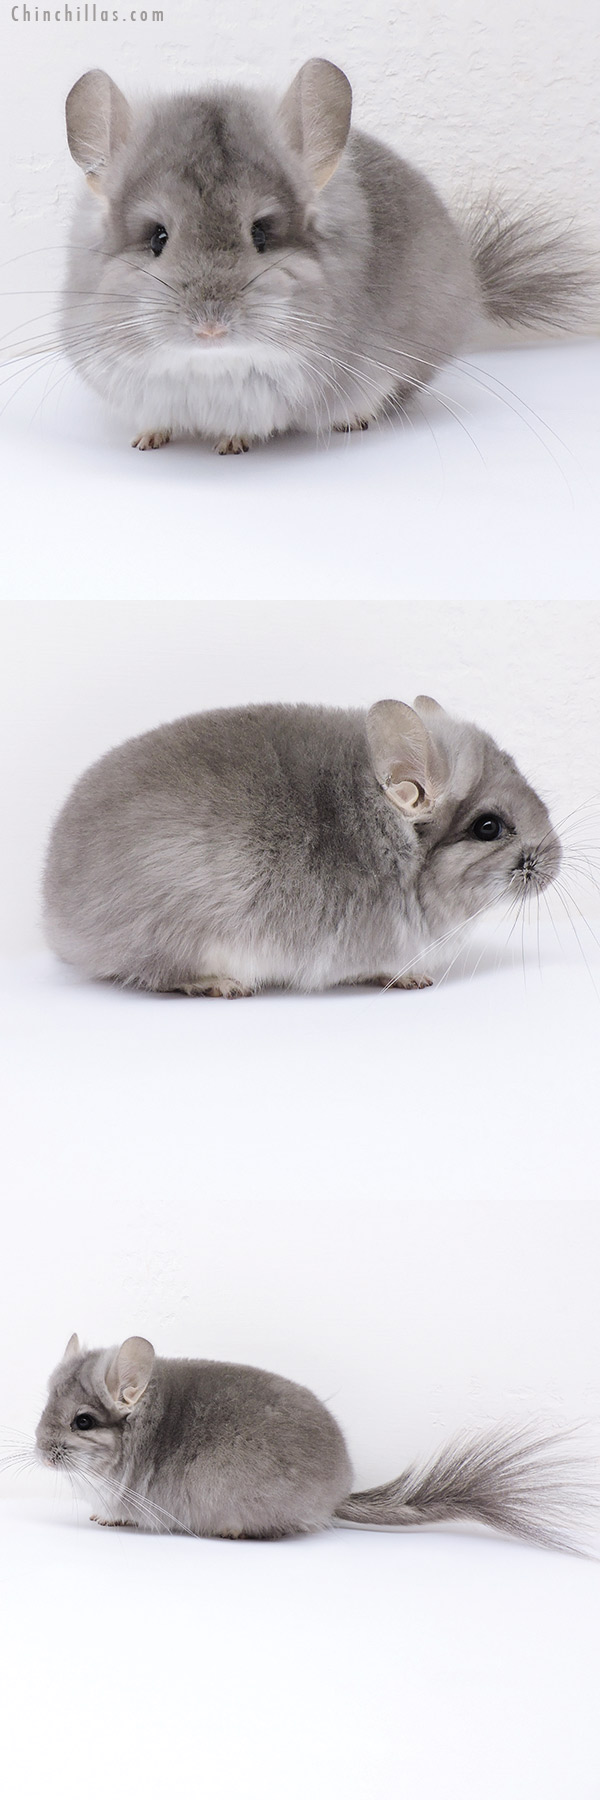 Chinchilla or related item offered for sale or export on Chinchillas.com - 19071 Exceptional Violet  Royal Persian Angora Female Chinchilla